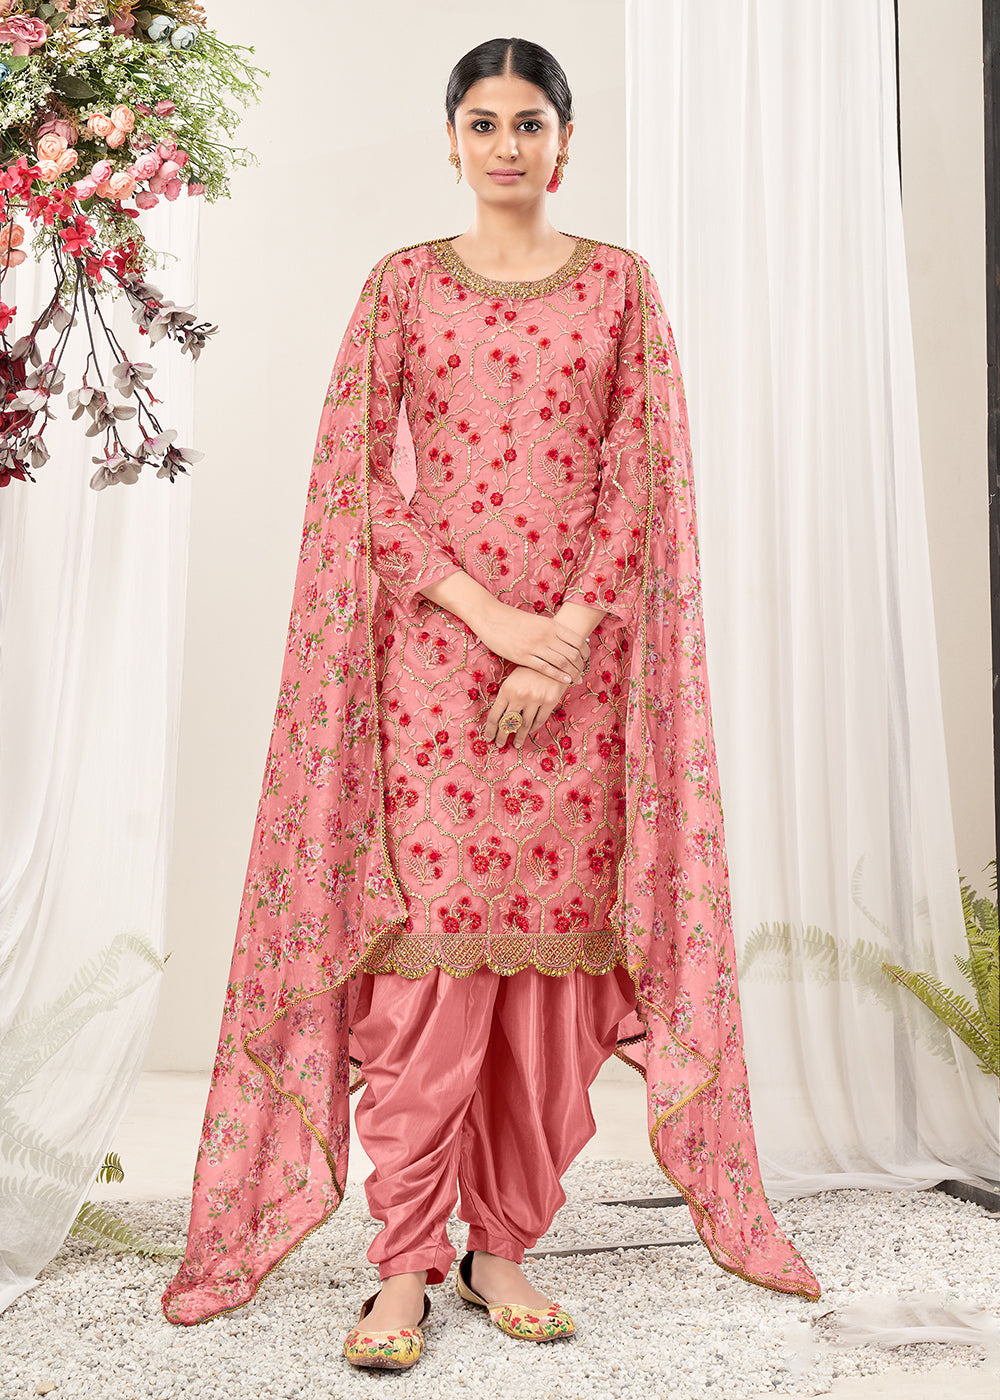 Patiala Salwar Suits - 20 Stylish and Trendy Collection